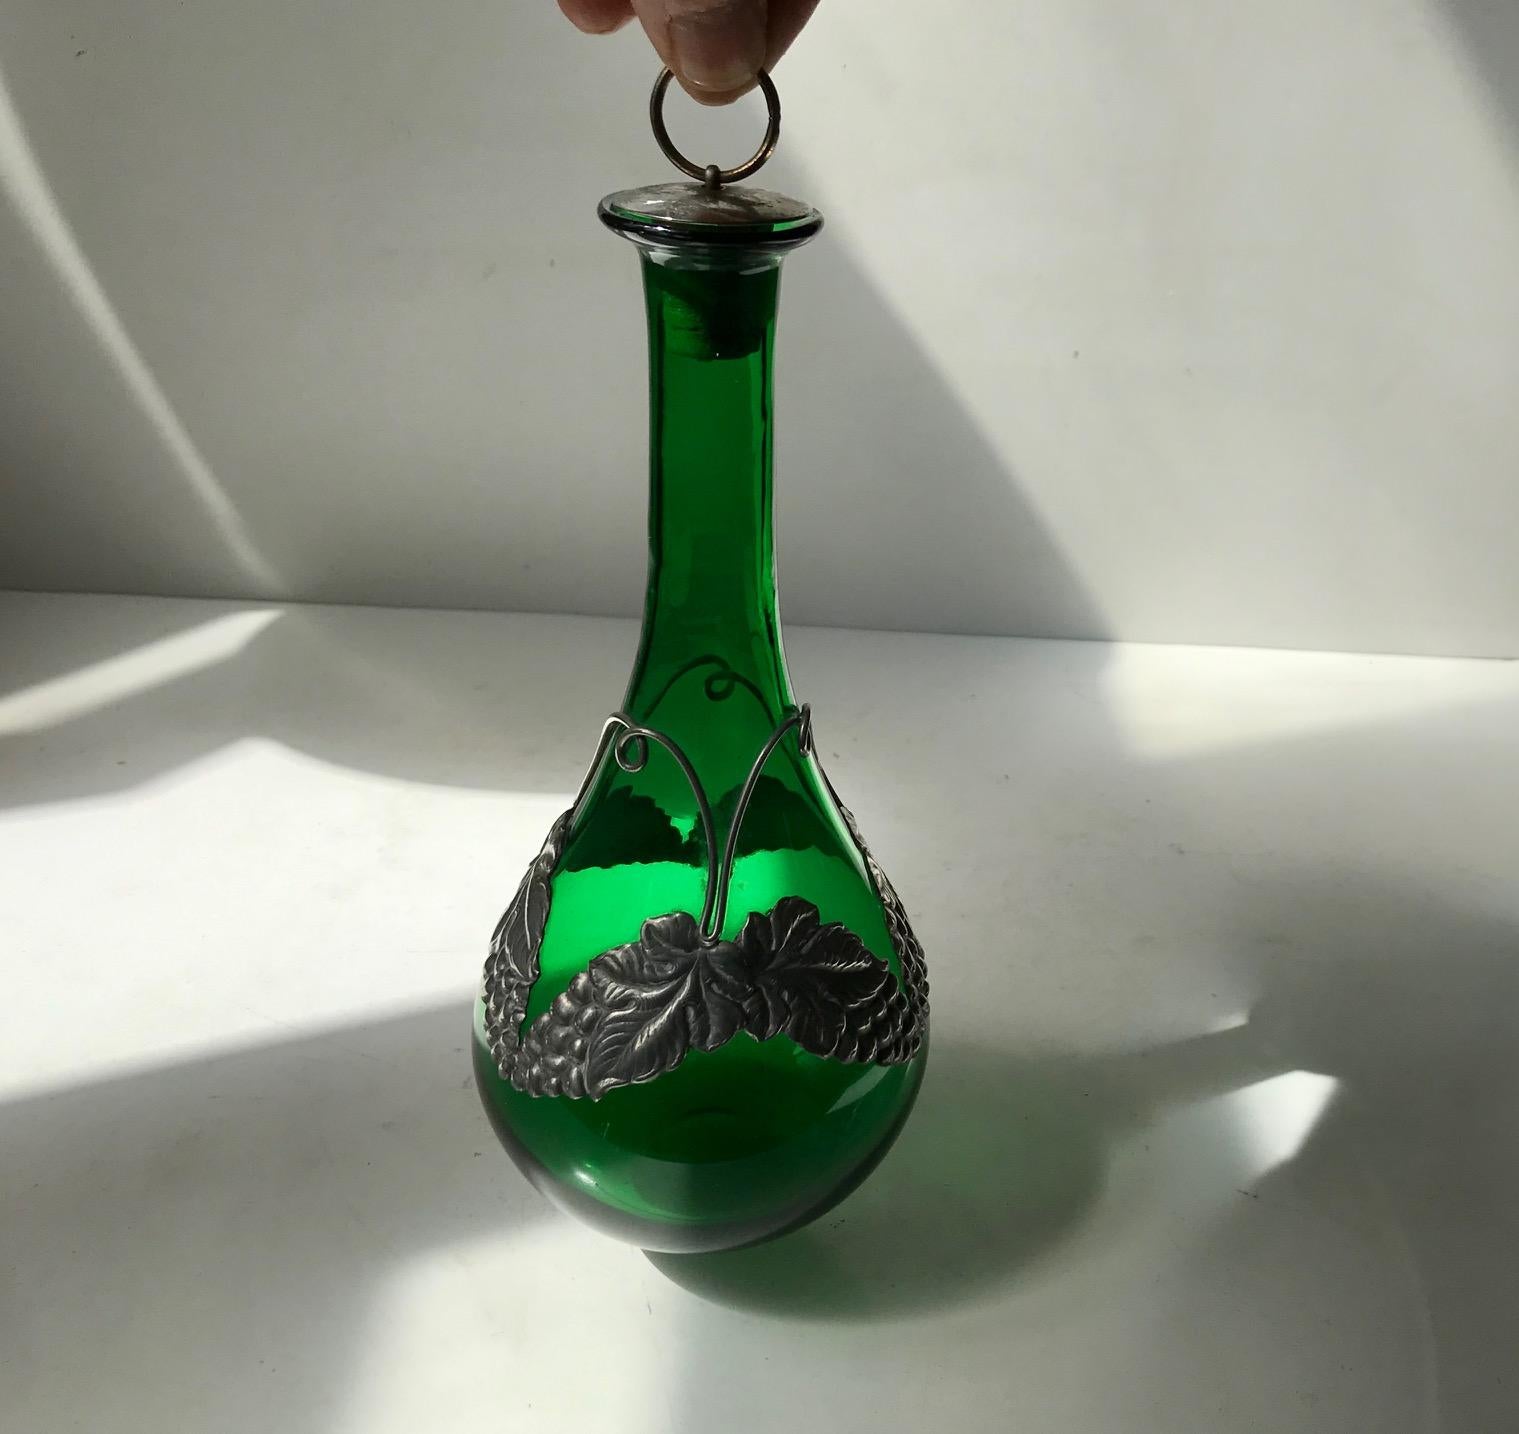 Organically shaped handblown decanter with a floral decoration in pewter. This decanter was made at Holmegaard in Denmark during the early 192os. The art nouveau pewter belt was created by a danish silversmith in the same period. This item is